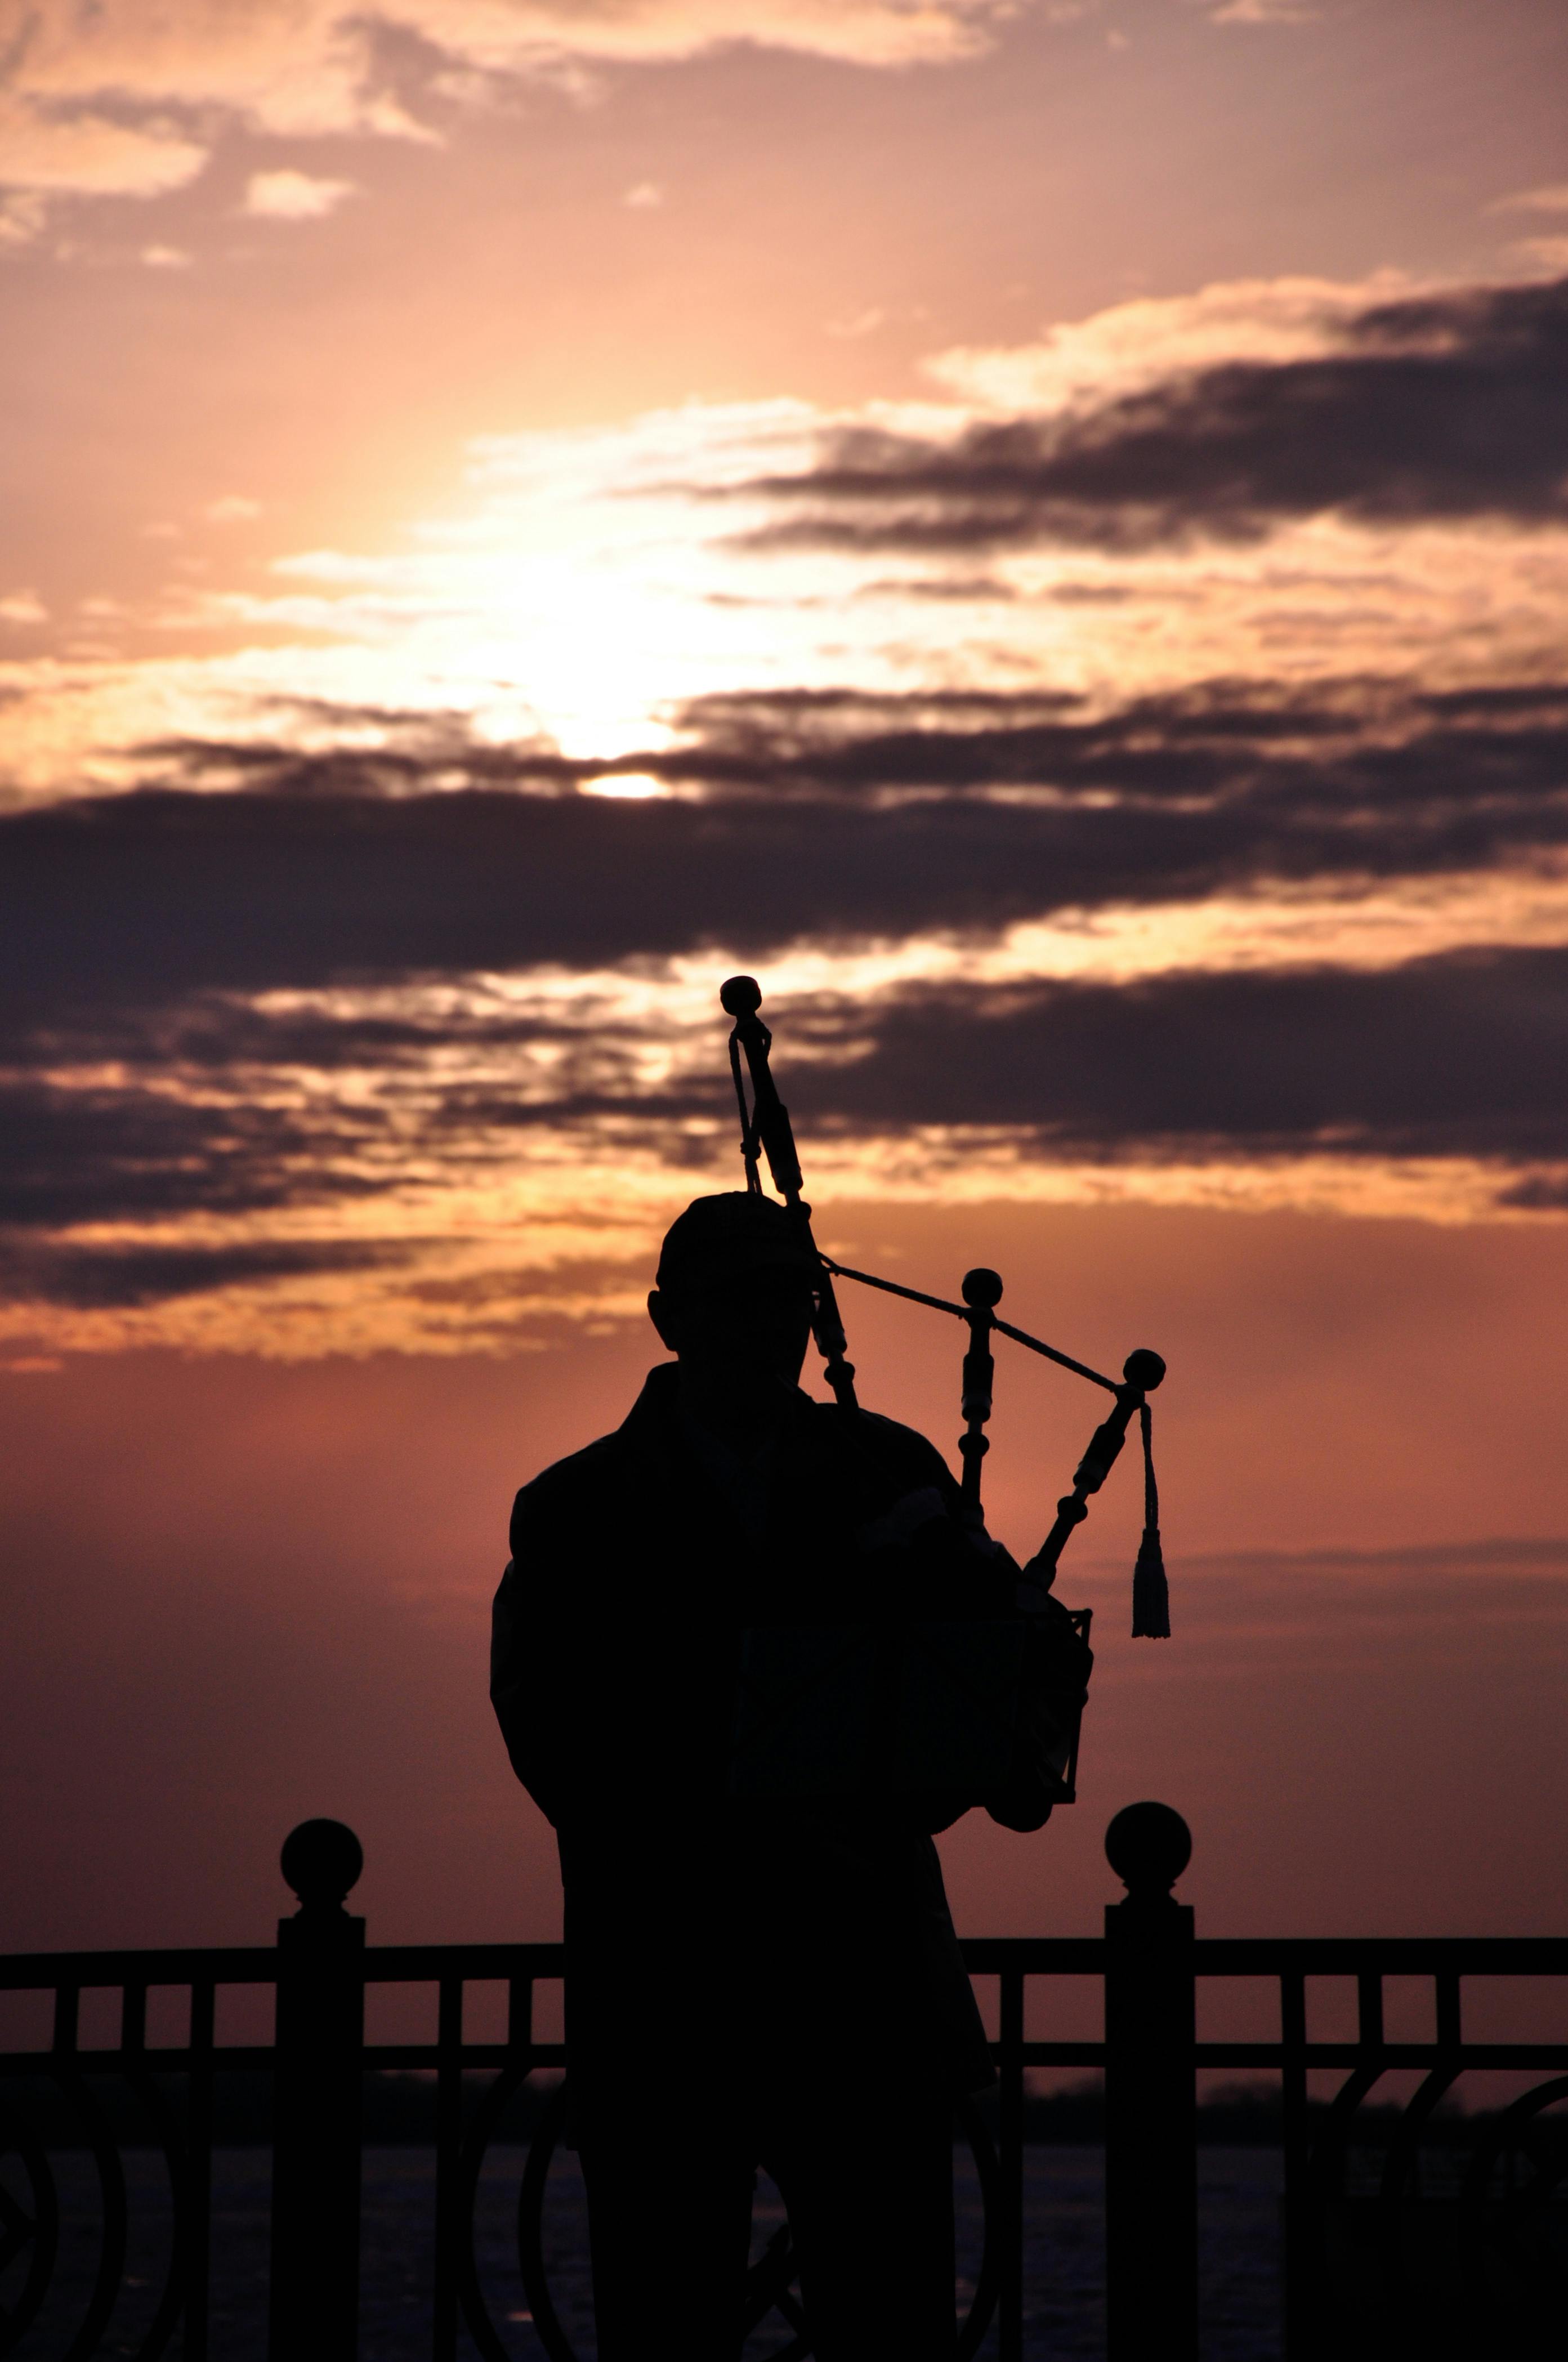 7900 Bagpipe Stock Photos Pictures  RoyaltyFree Images  iStock   Bagpipe player Scottish bagpipe Playing bagpipe